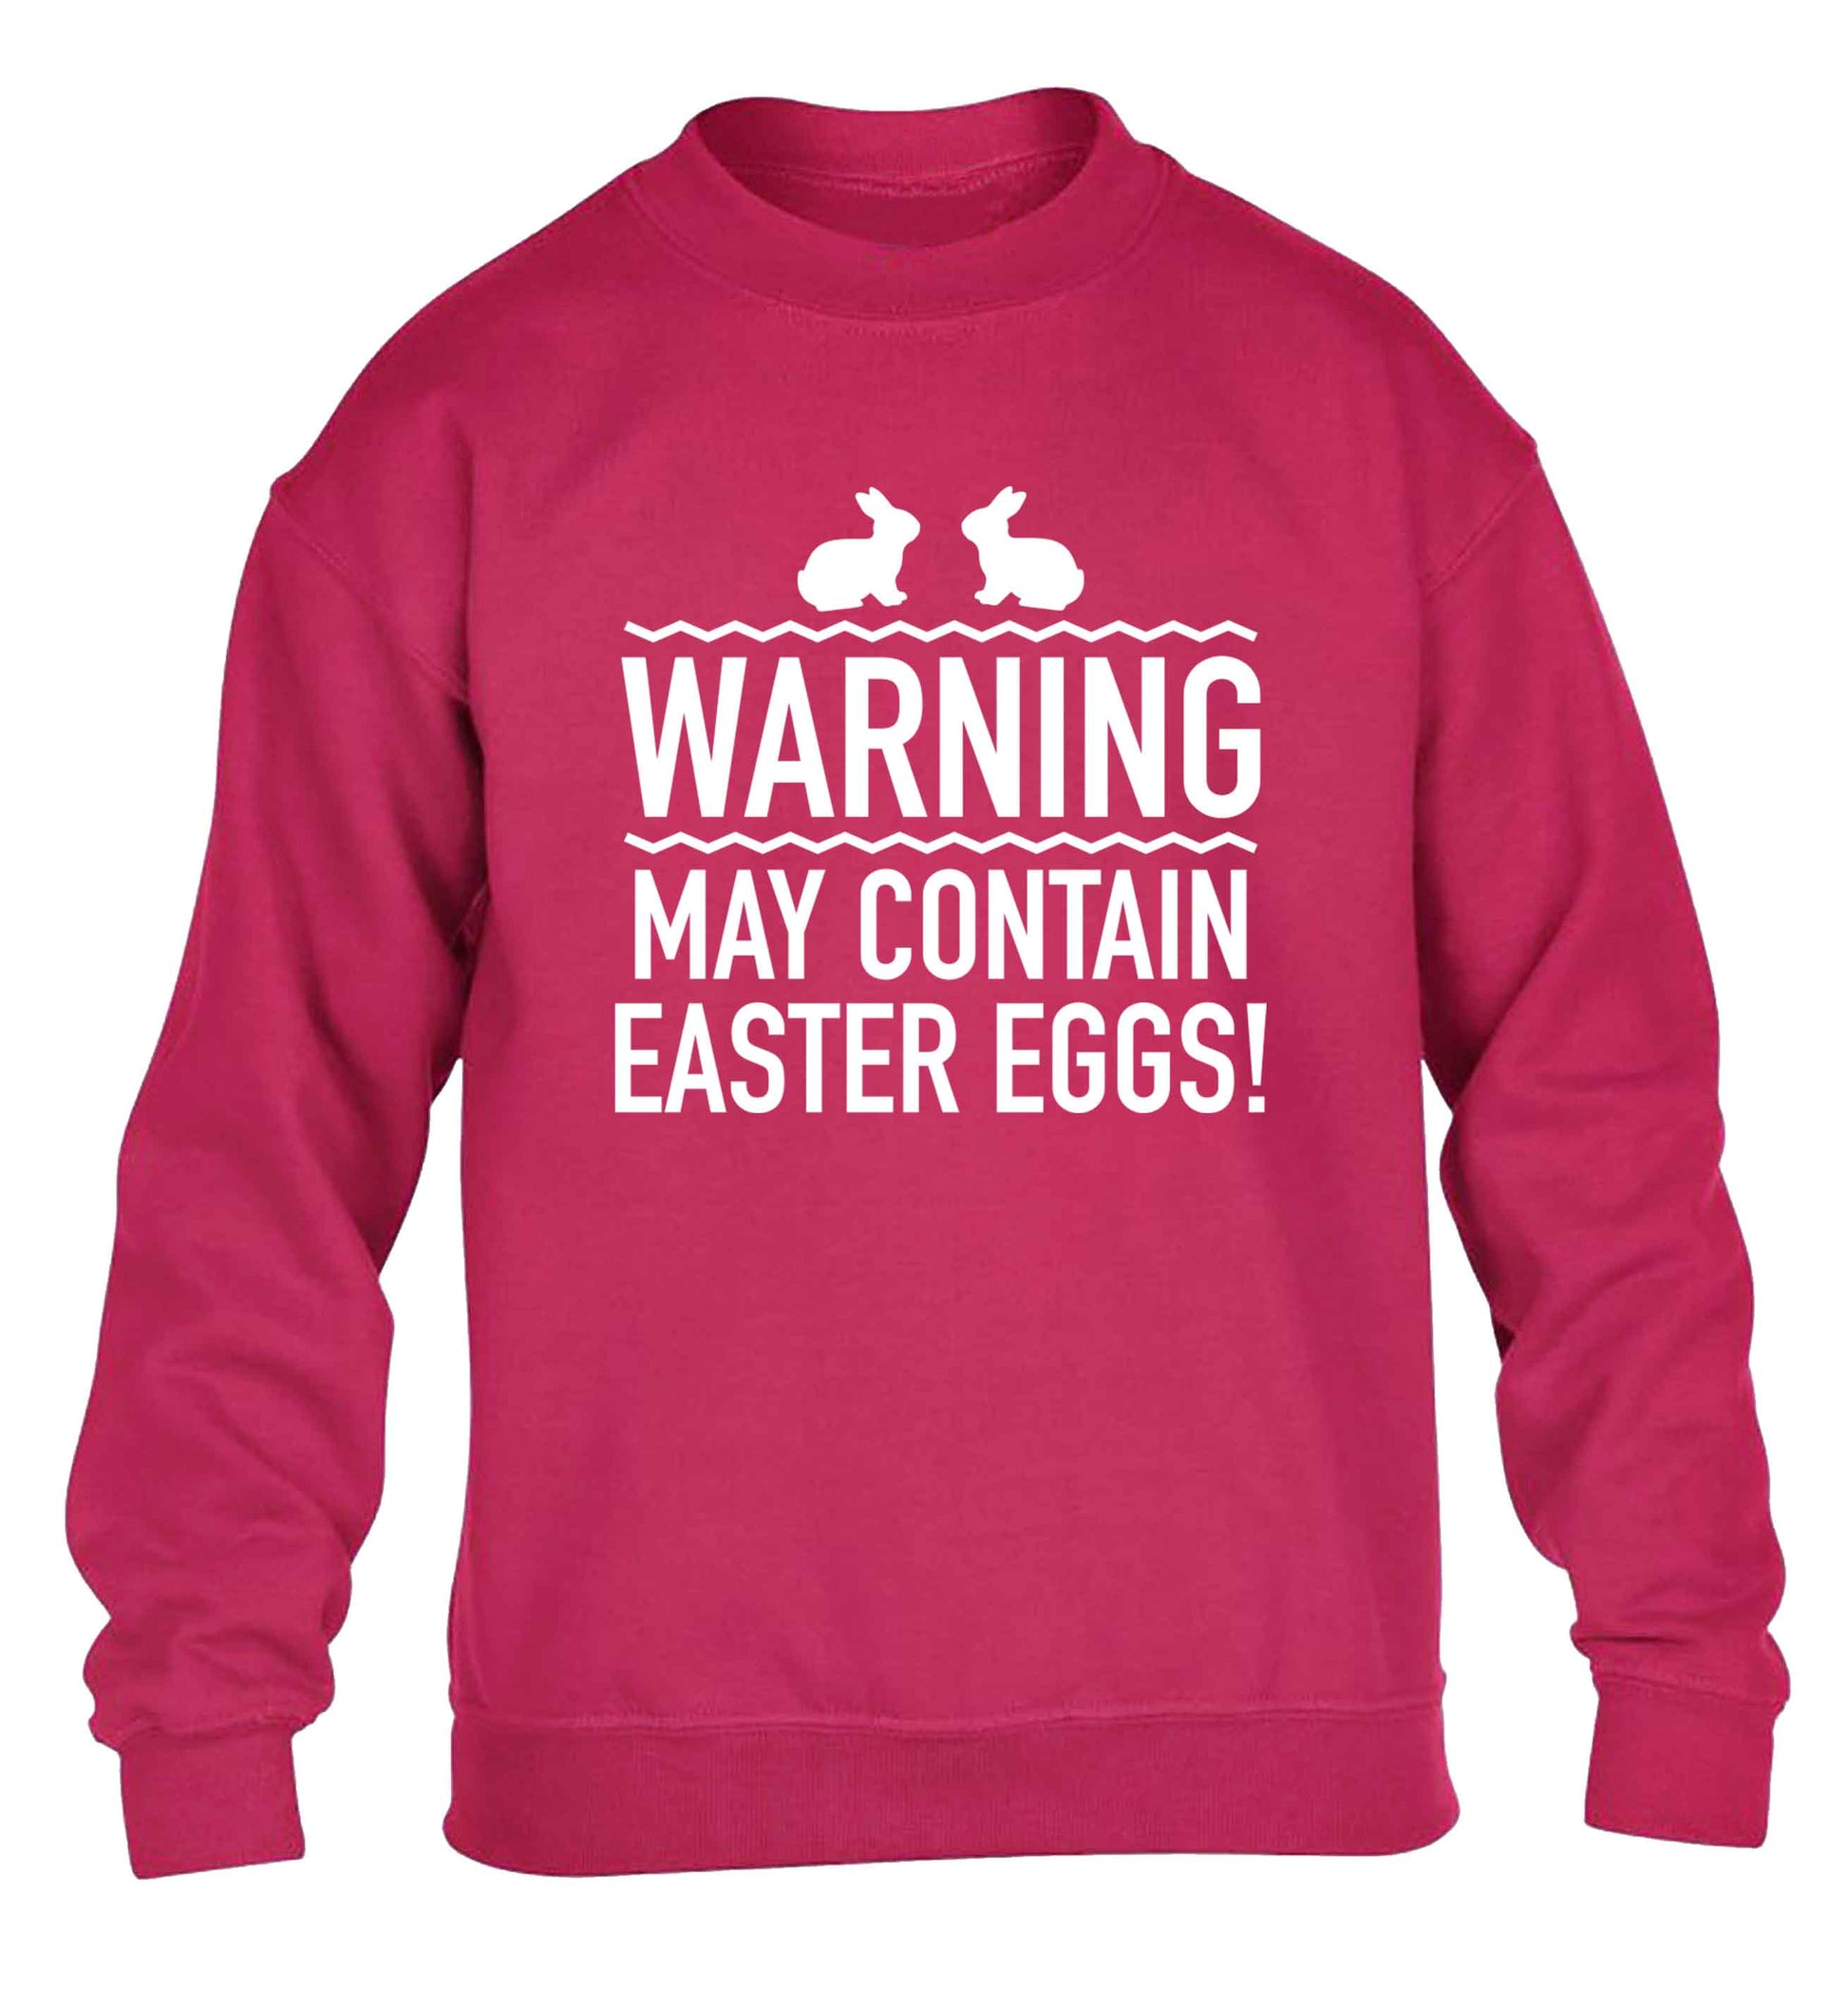 Warning may contain Easter eggs children's pink sweater 12-13 Years